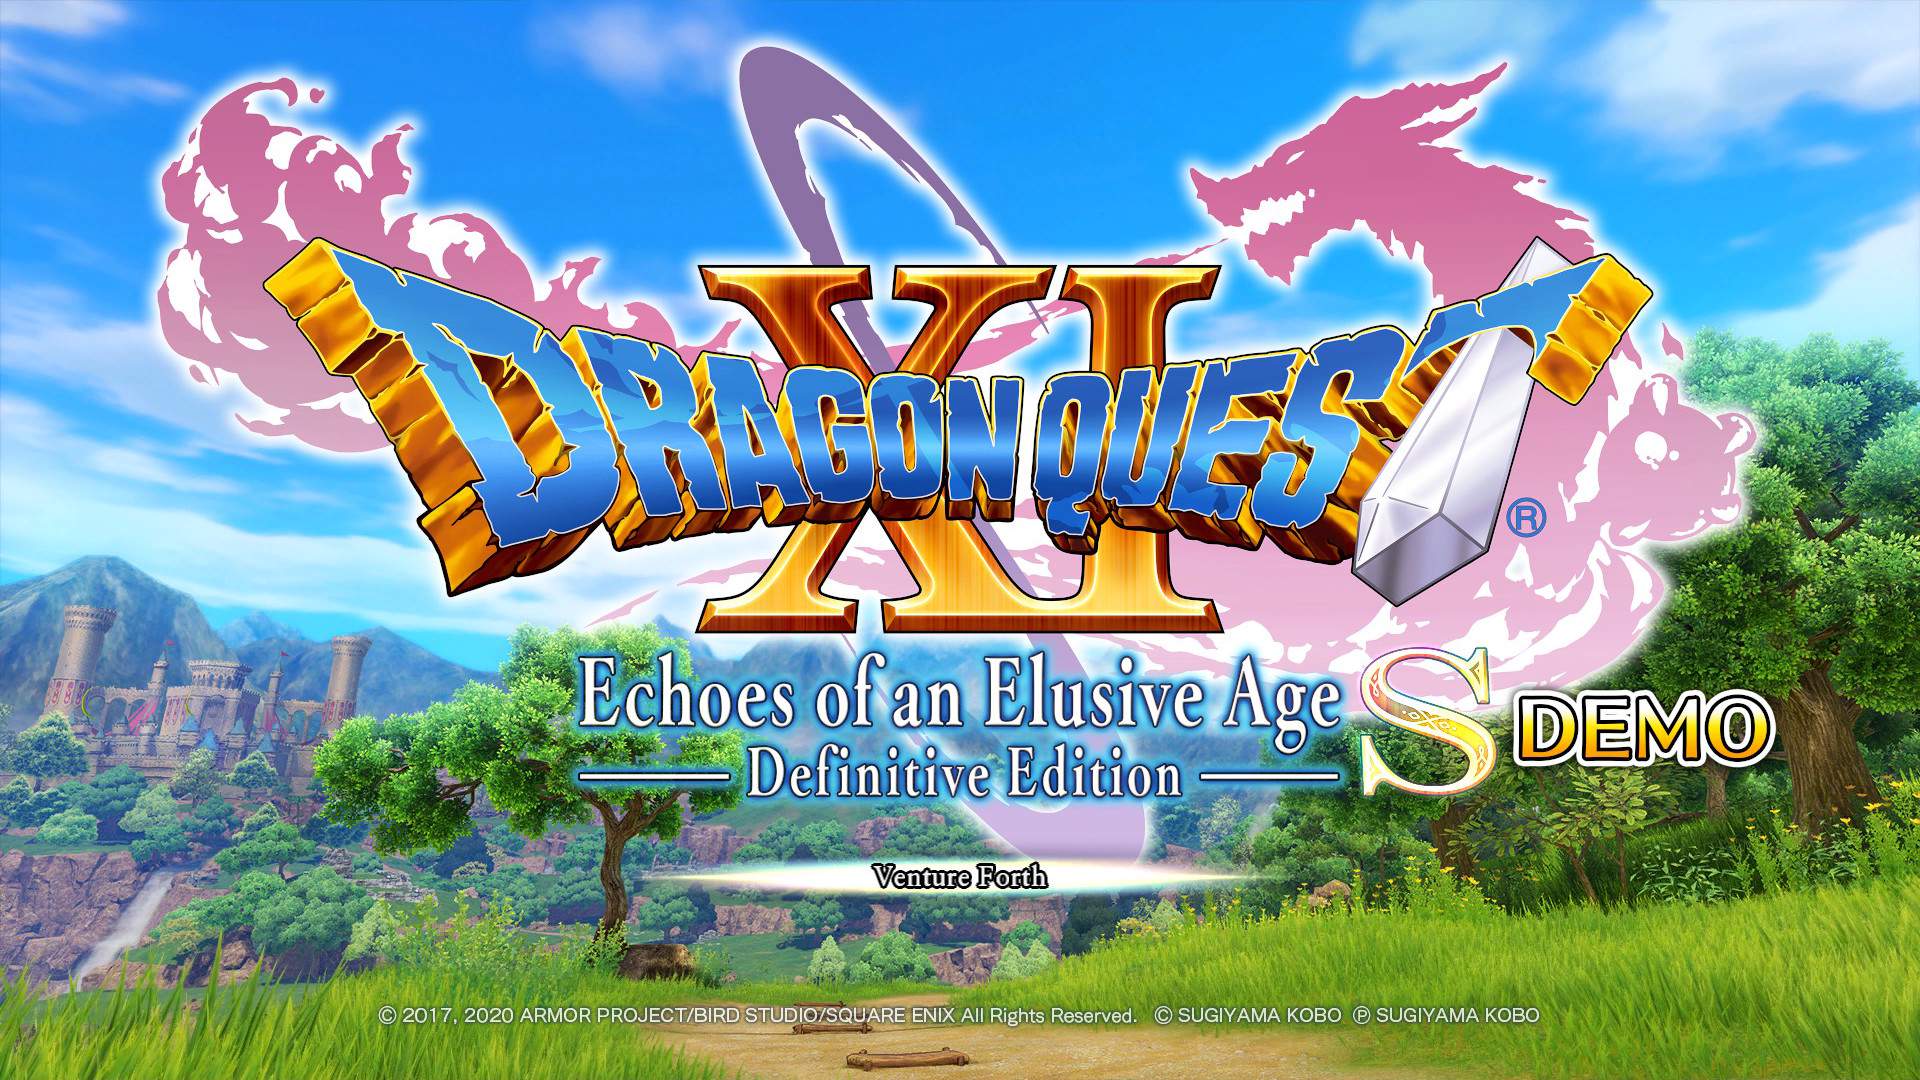 Dragon Quest Xi S Echoes Of An Elusive Age Definitive Edition Demo Square Enix